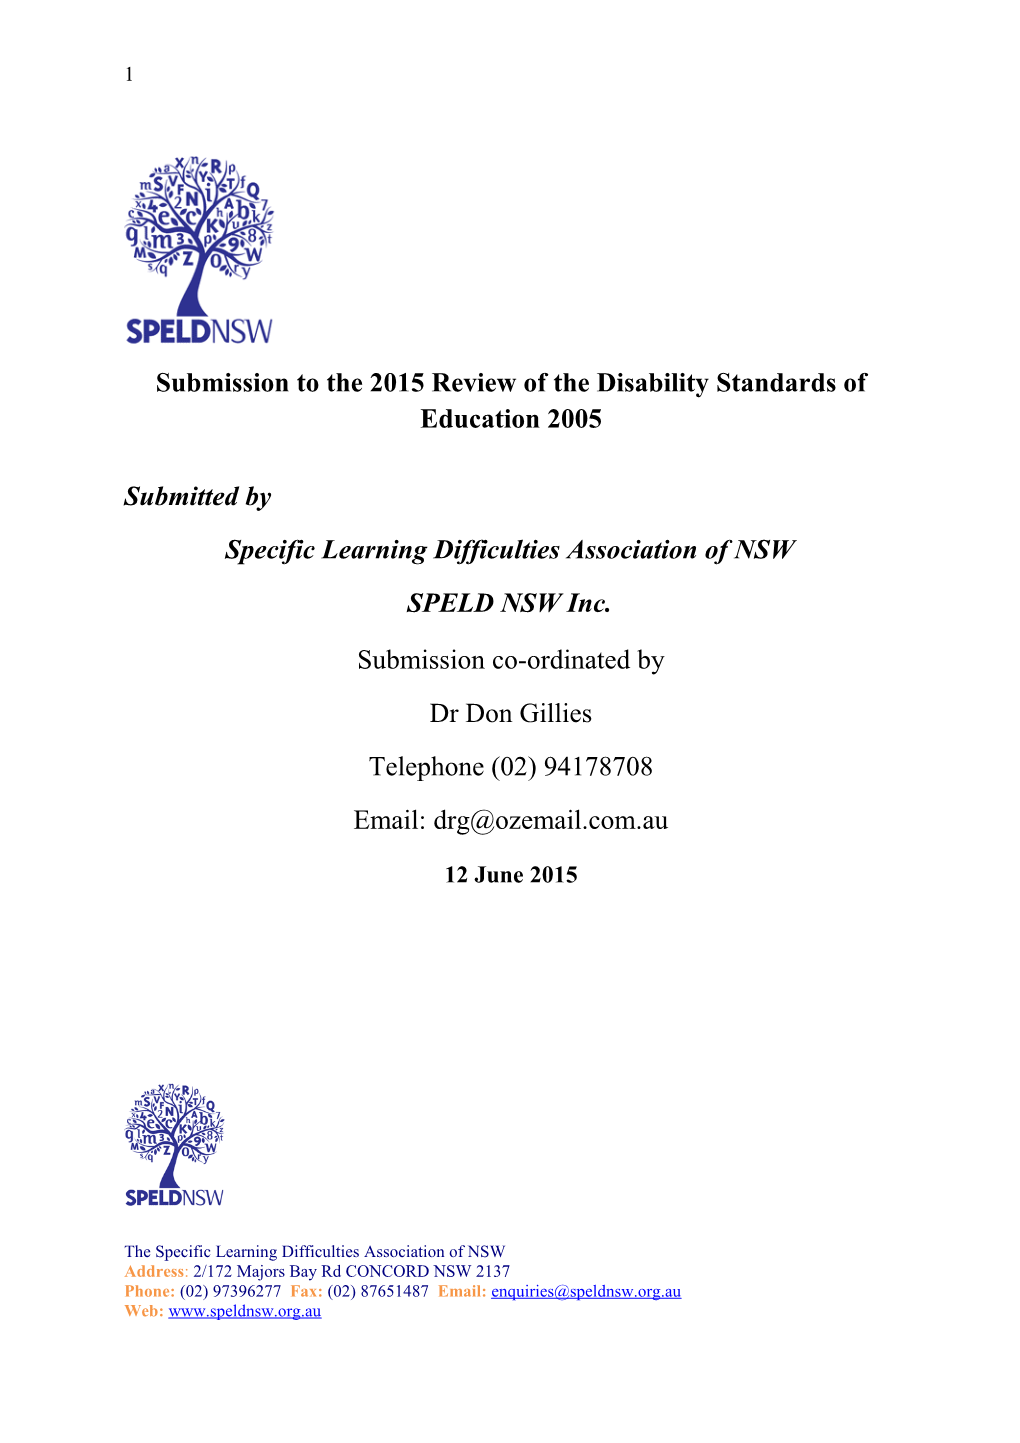 Submission to the 2015 Review of the Disability Standards of Education 2005